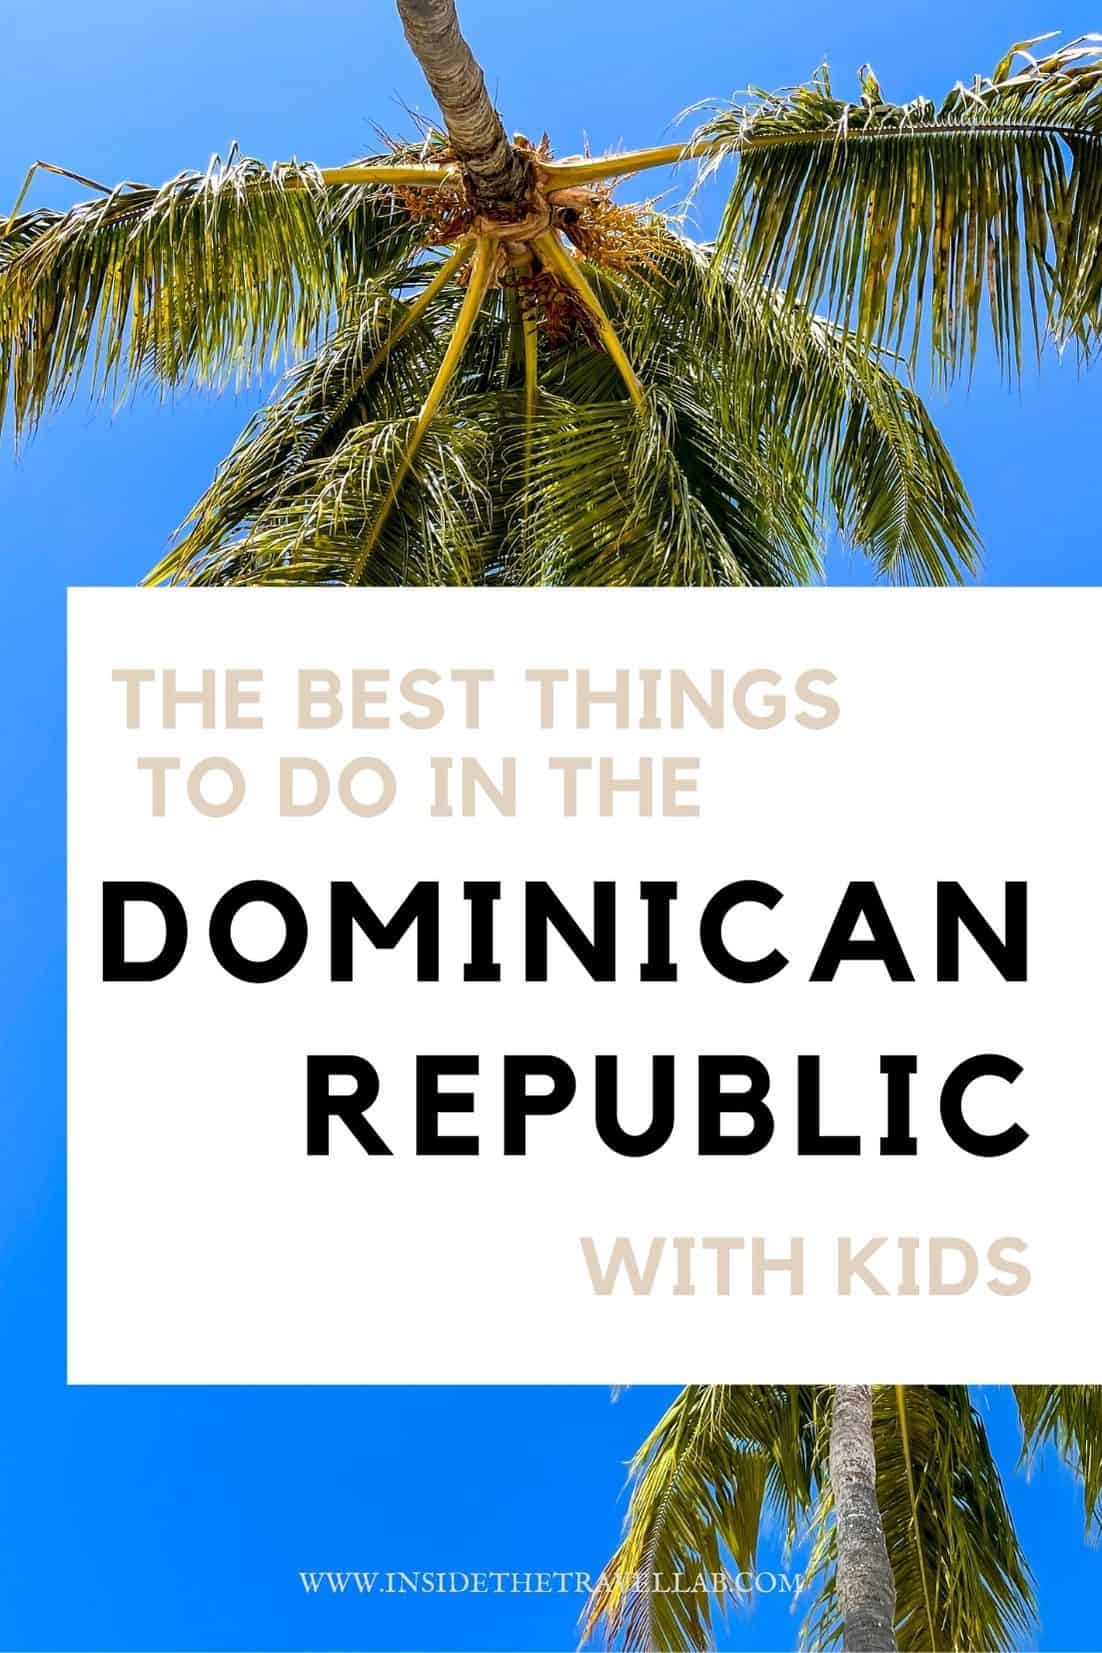 The best things to do in the Dominican Republic with kids